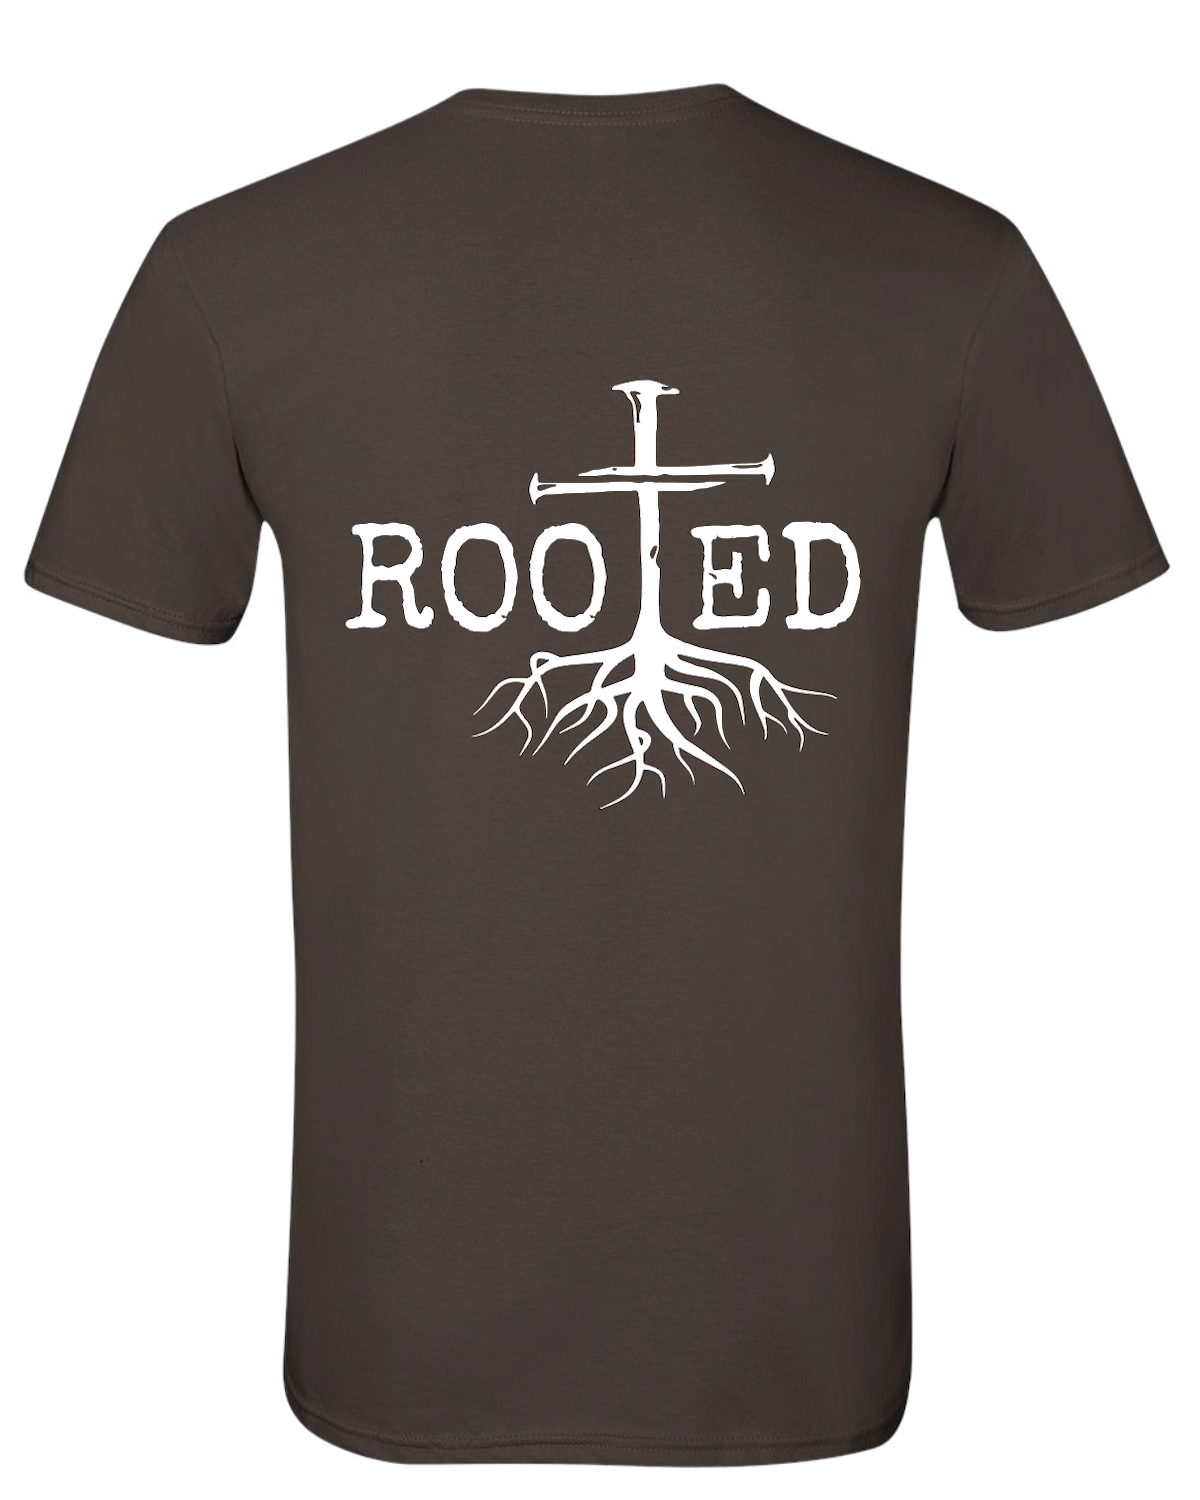 Rooted (On Back) Gildan Softstyle T-Shirt